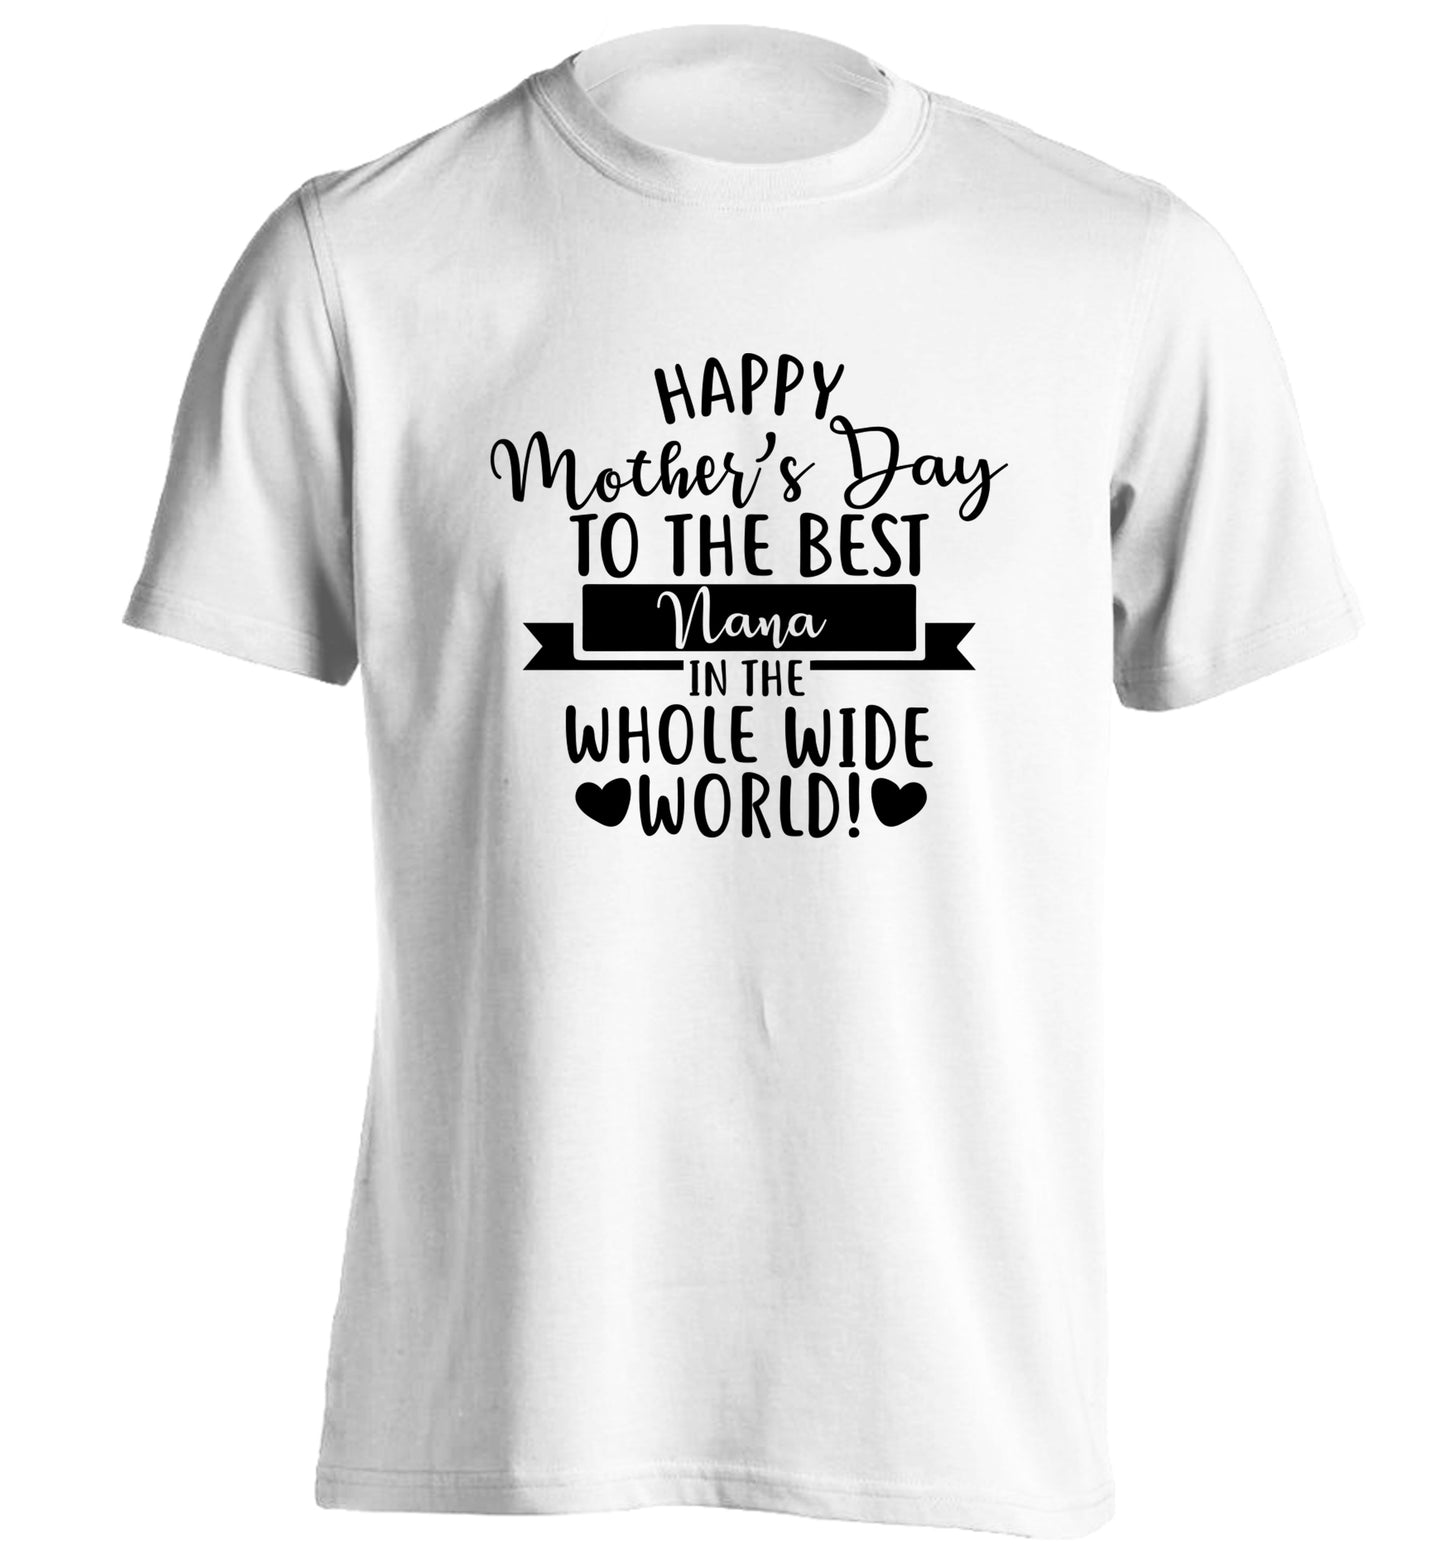 Happy mother's day to the best Nana in the world adults unisex white Tshirt 2XL